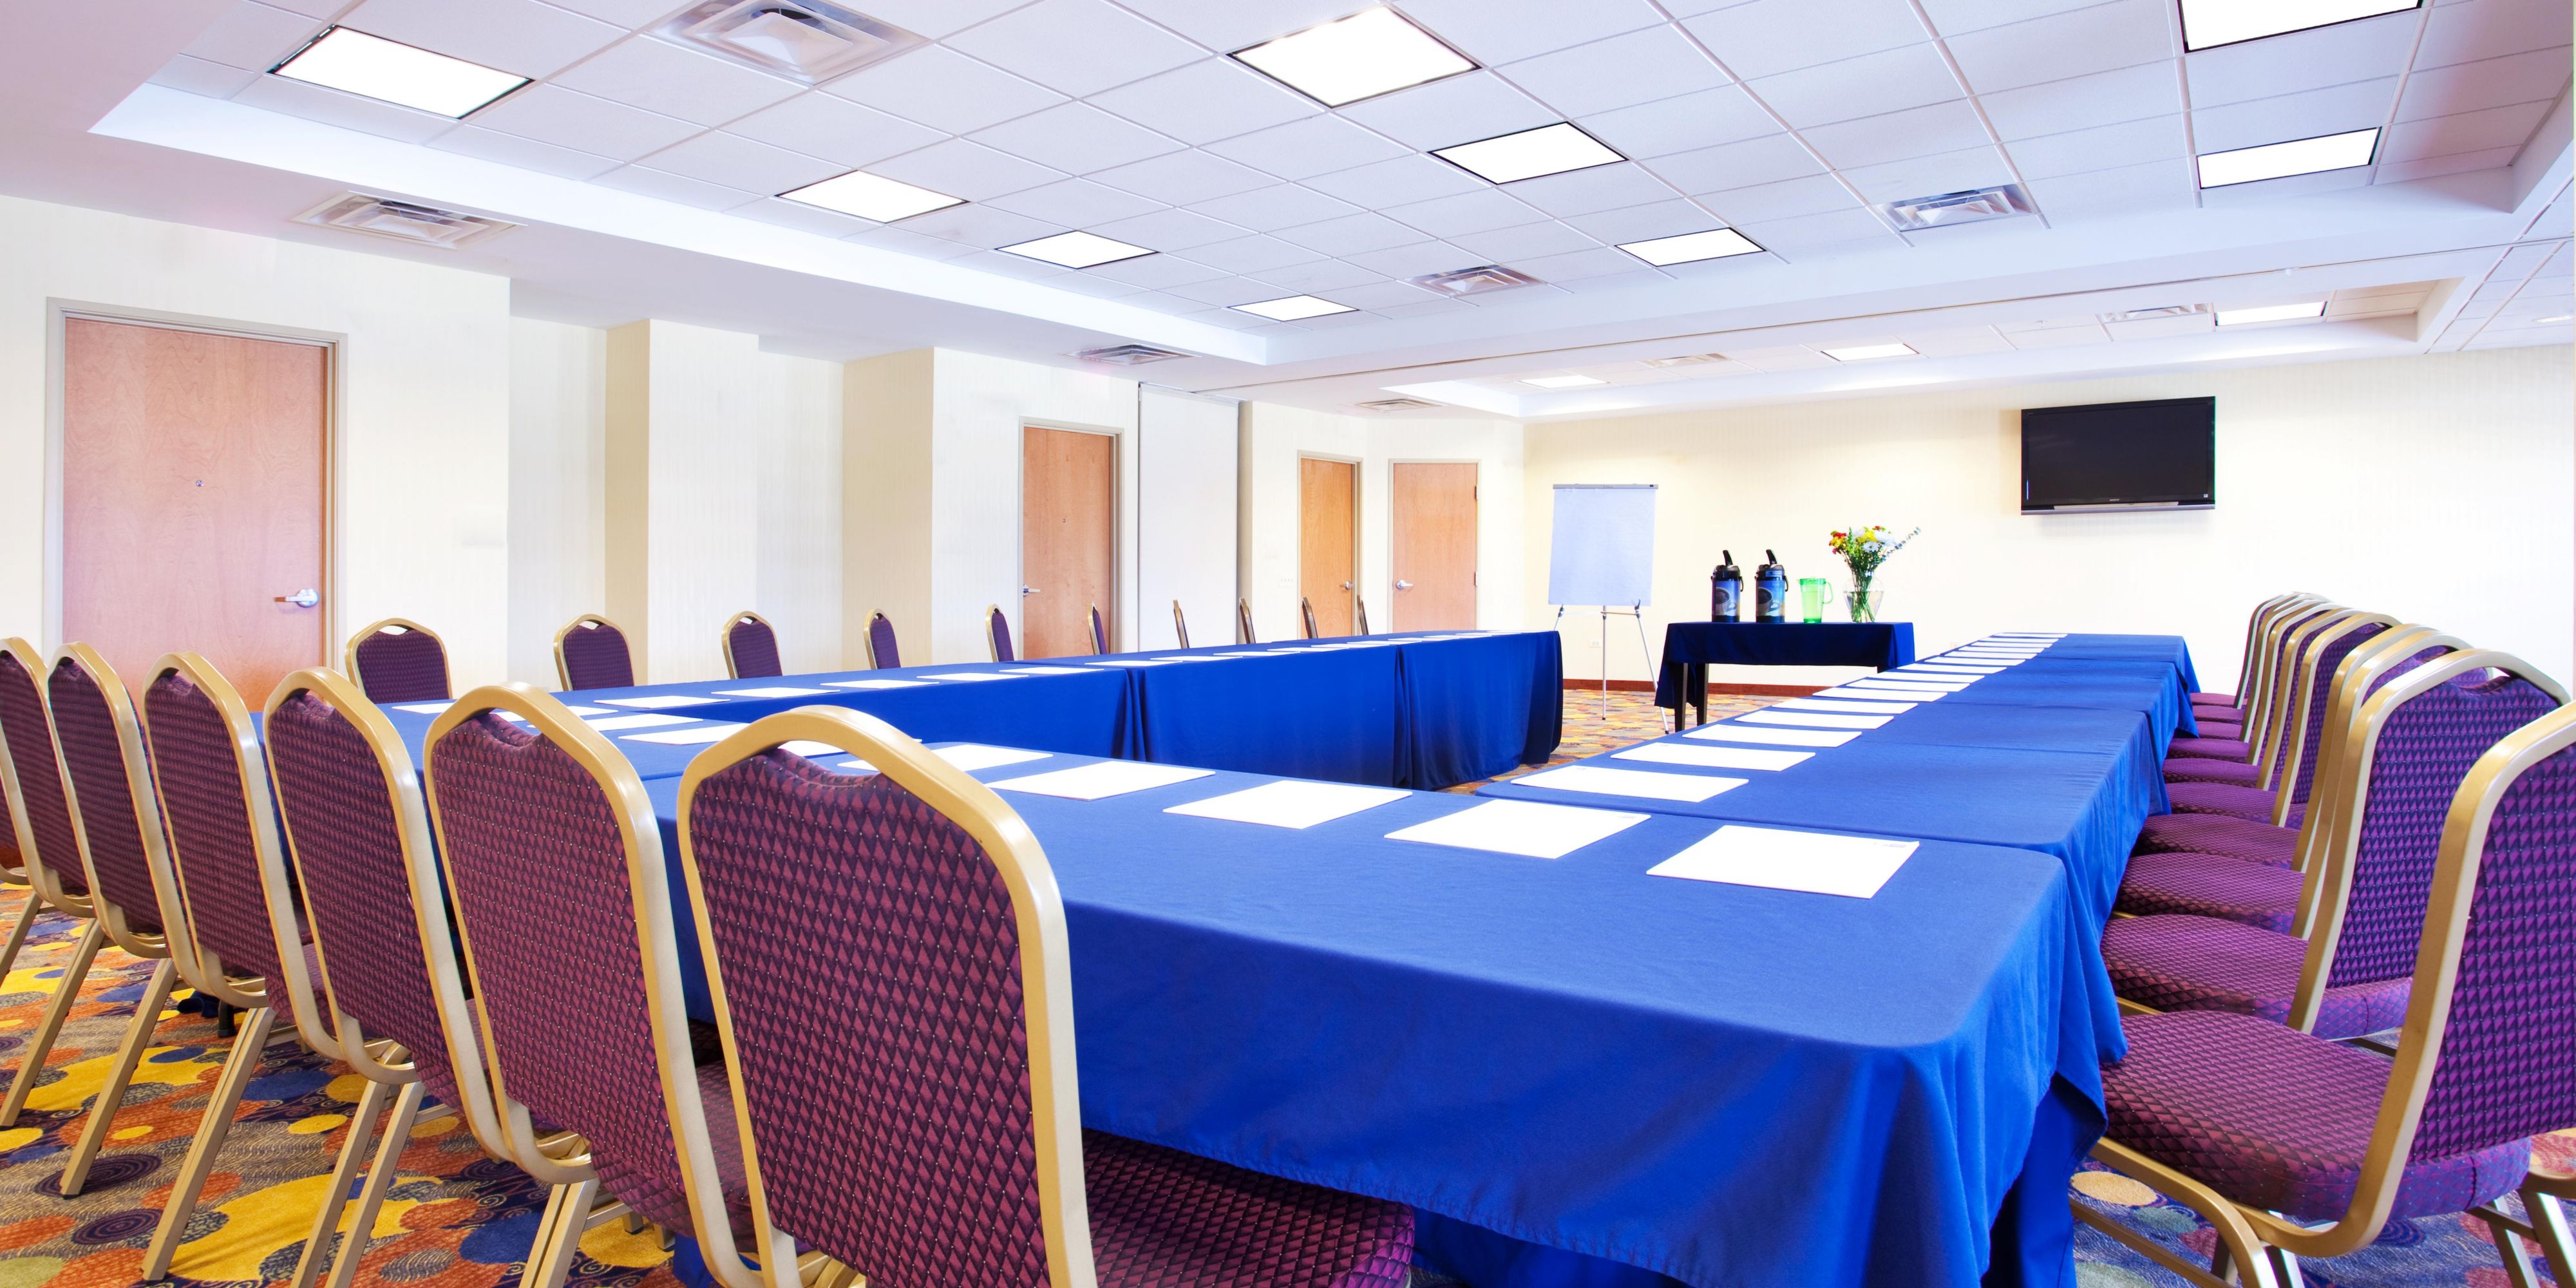 With up to 1,600 square feet of flexible meeting space, the Holiday Inn Express and Suites Waukegan IL is perfectly suited to host your small to medium-sized meeting or event.  The knowledgeable and attentive sales team will be with you every step of the planning process.  Our attention to detail will make your meeting or event a success.